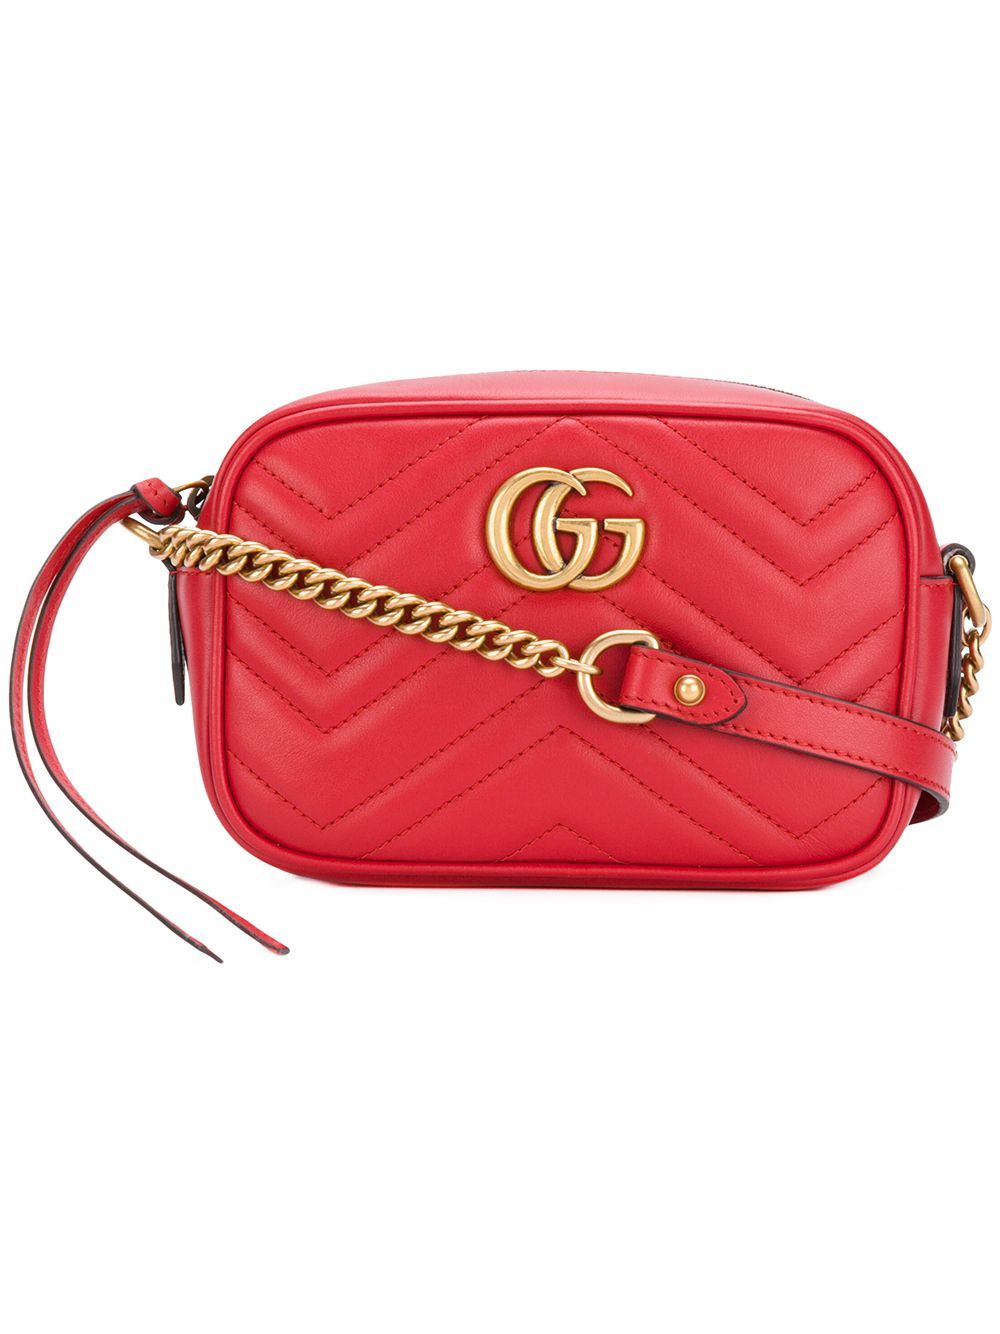 Gucci GG Marmont shoulder bag - Red | FarFetch Global